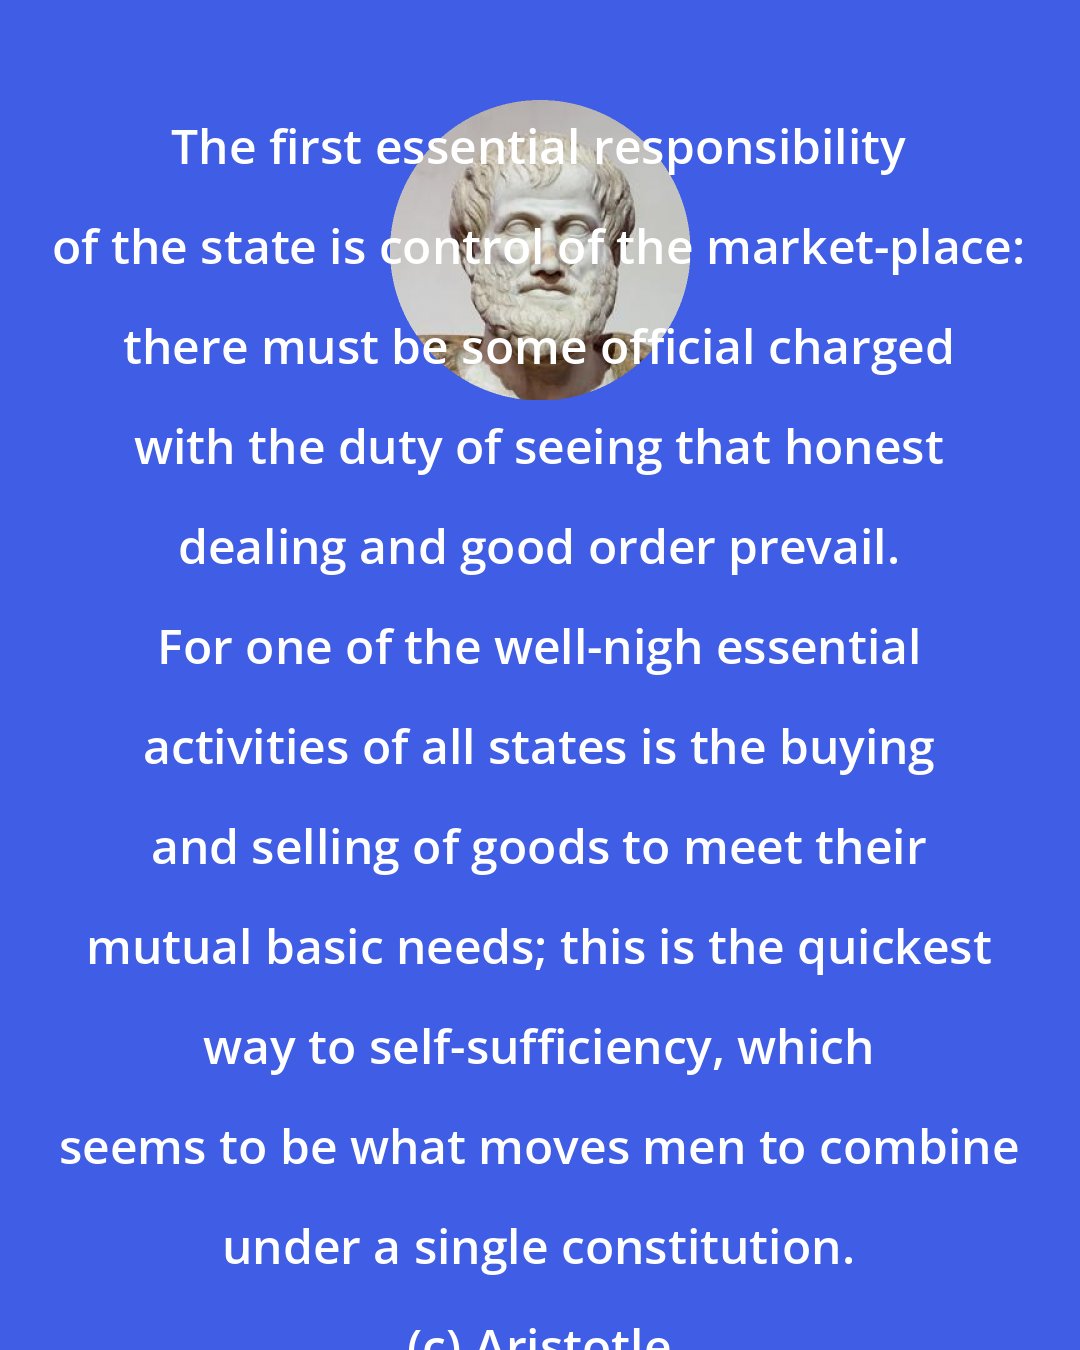 Aristotle: The first essential responsibility of the state is control of the market-place: there must be some official charged with the duty of seeing that honest dealing and good order prevail. For one of the well-nigh essential activities of all states is the buying and selling of goods to meet their mutual basic needs; this is the quickest way to self-sufficiency, which seems to be what moves men to combine under a single constitution.